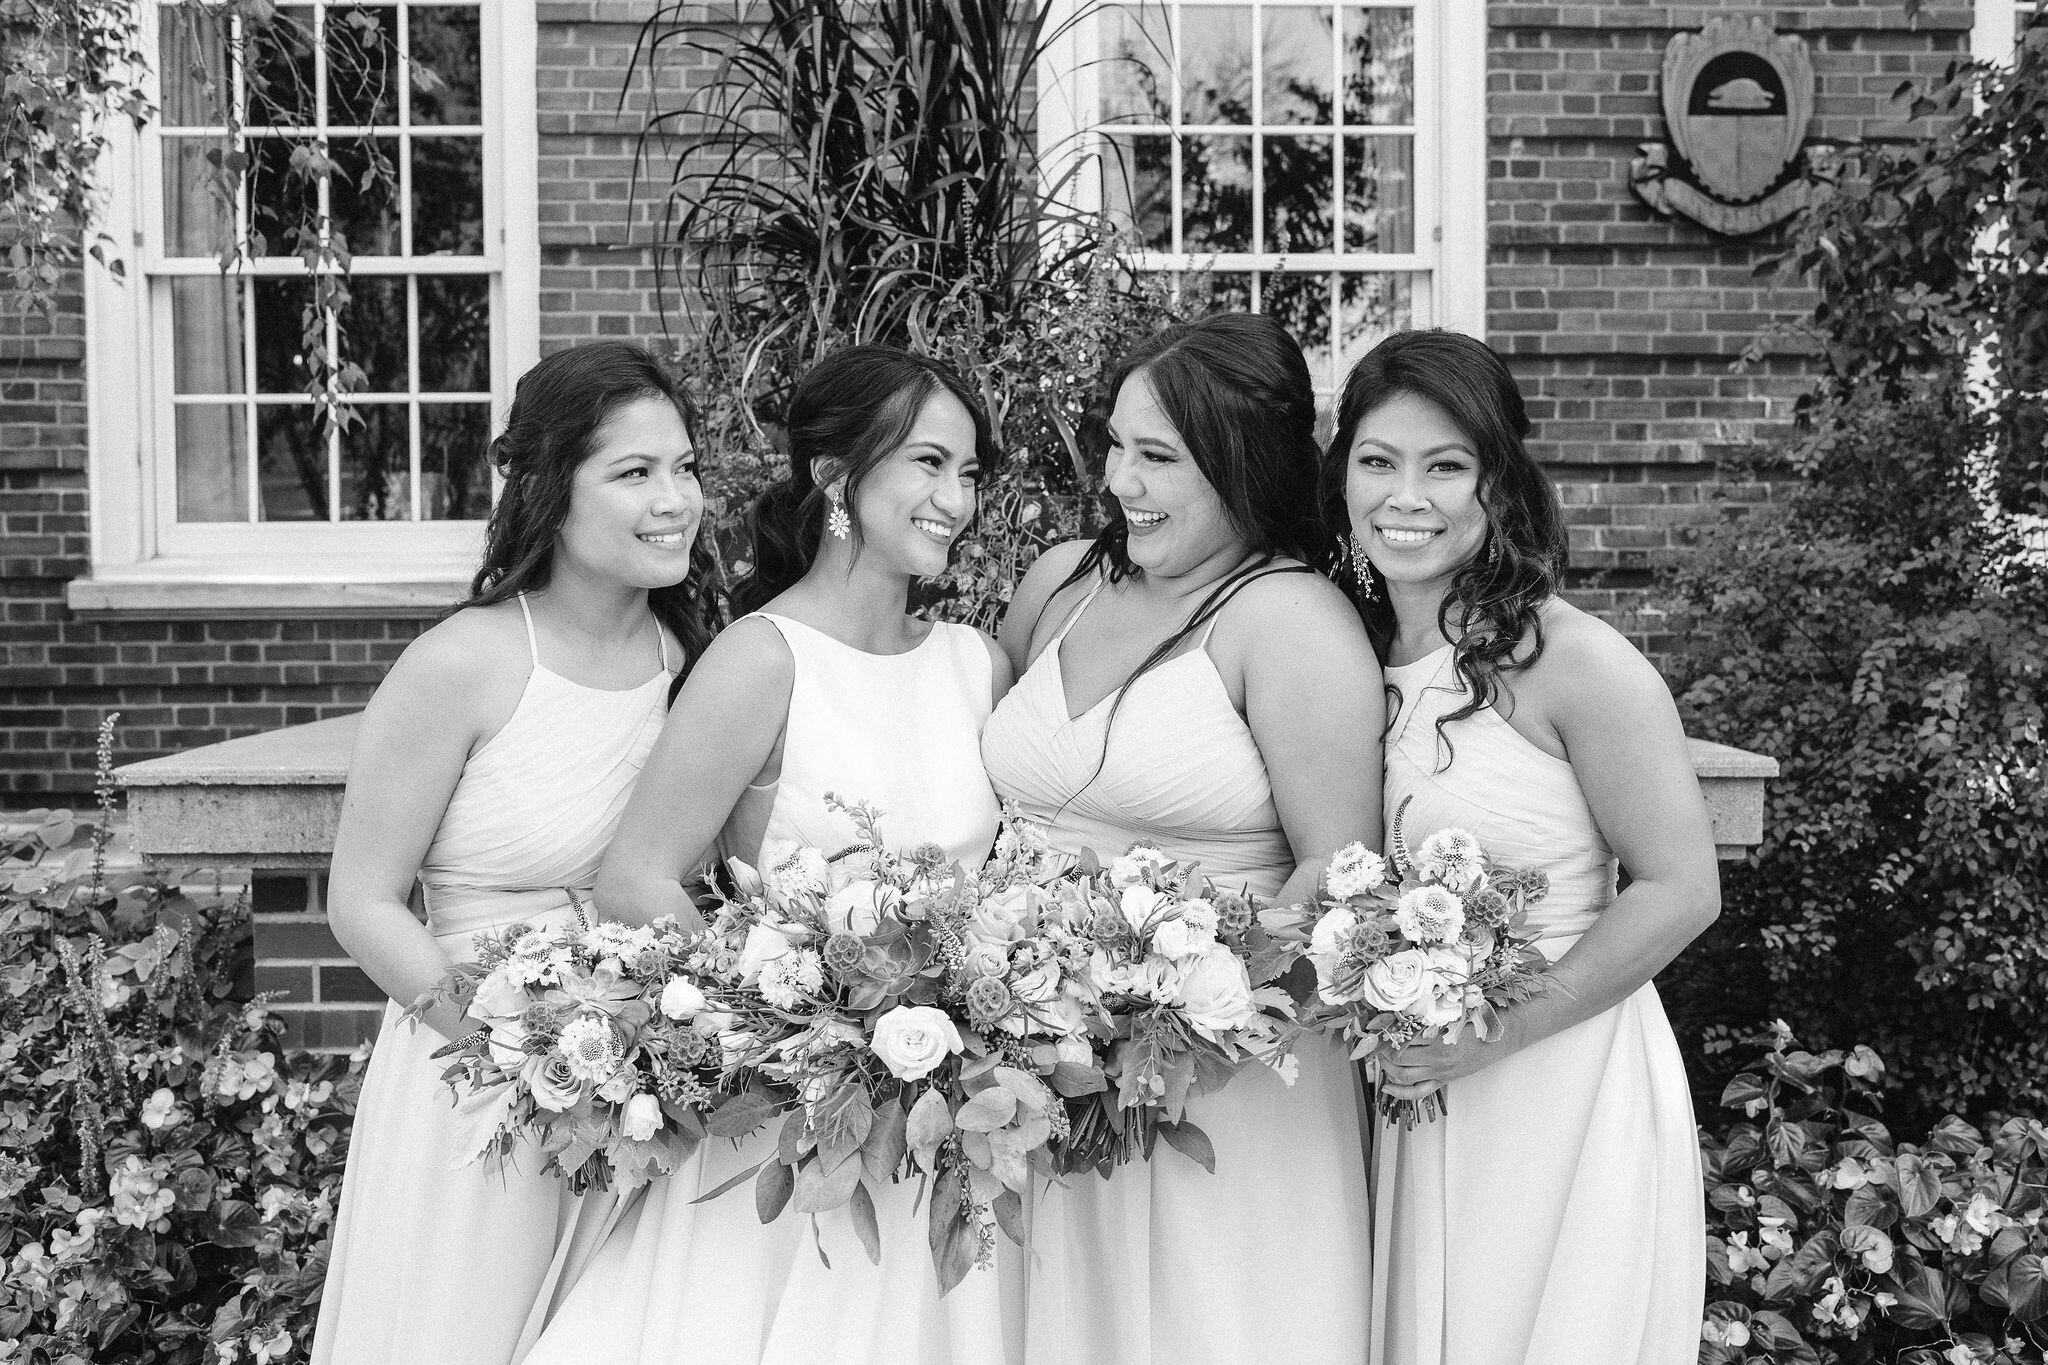 Bride with her sisters